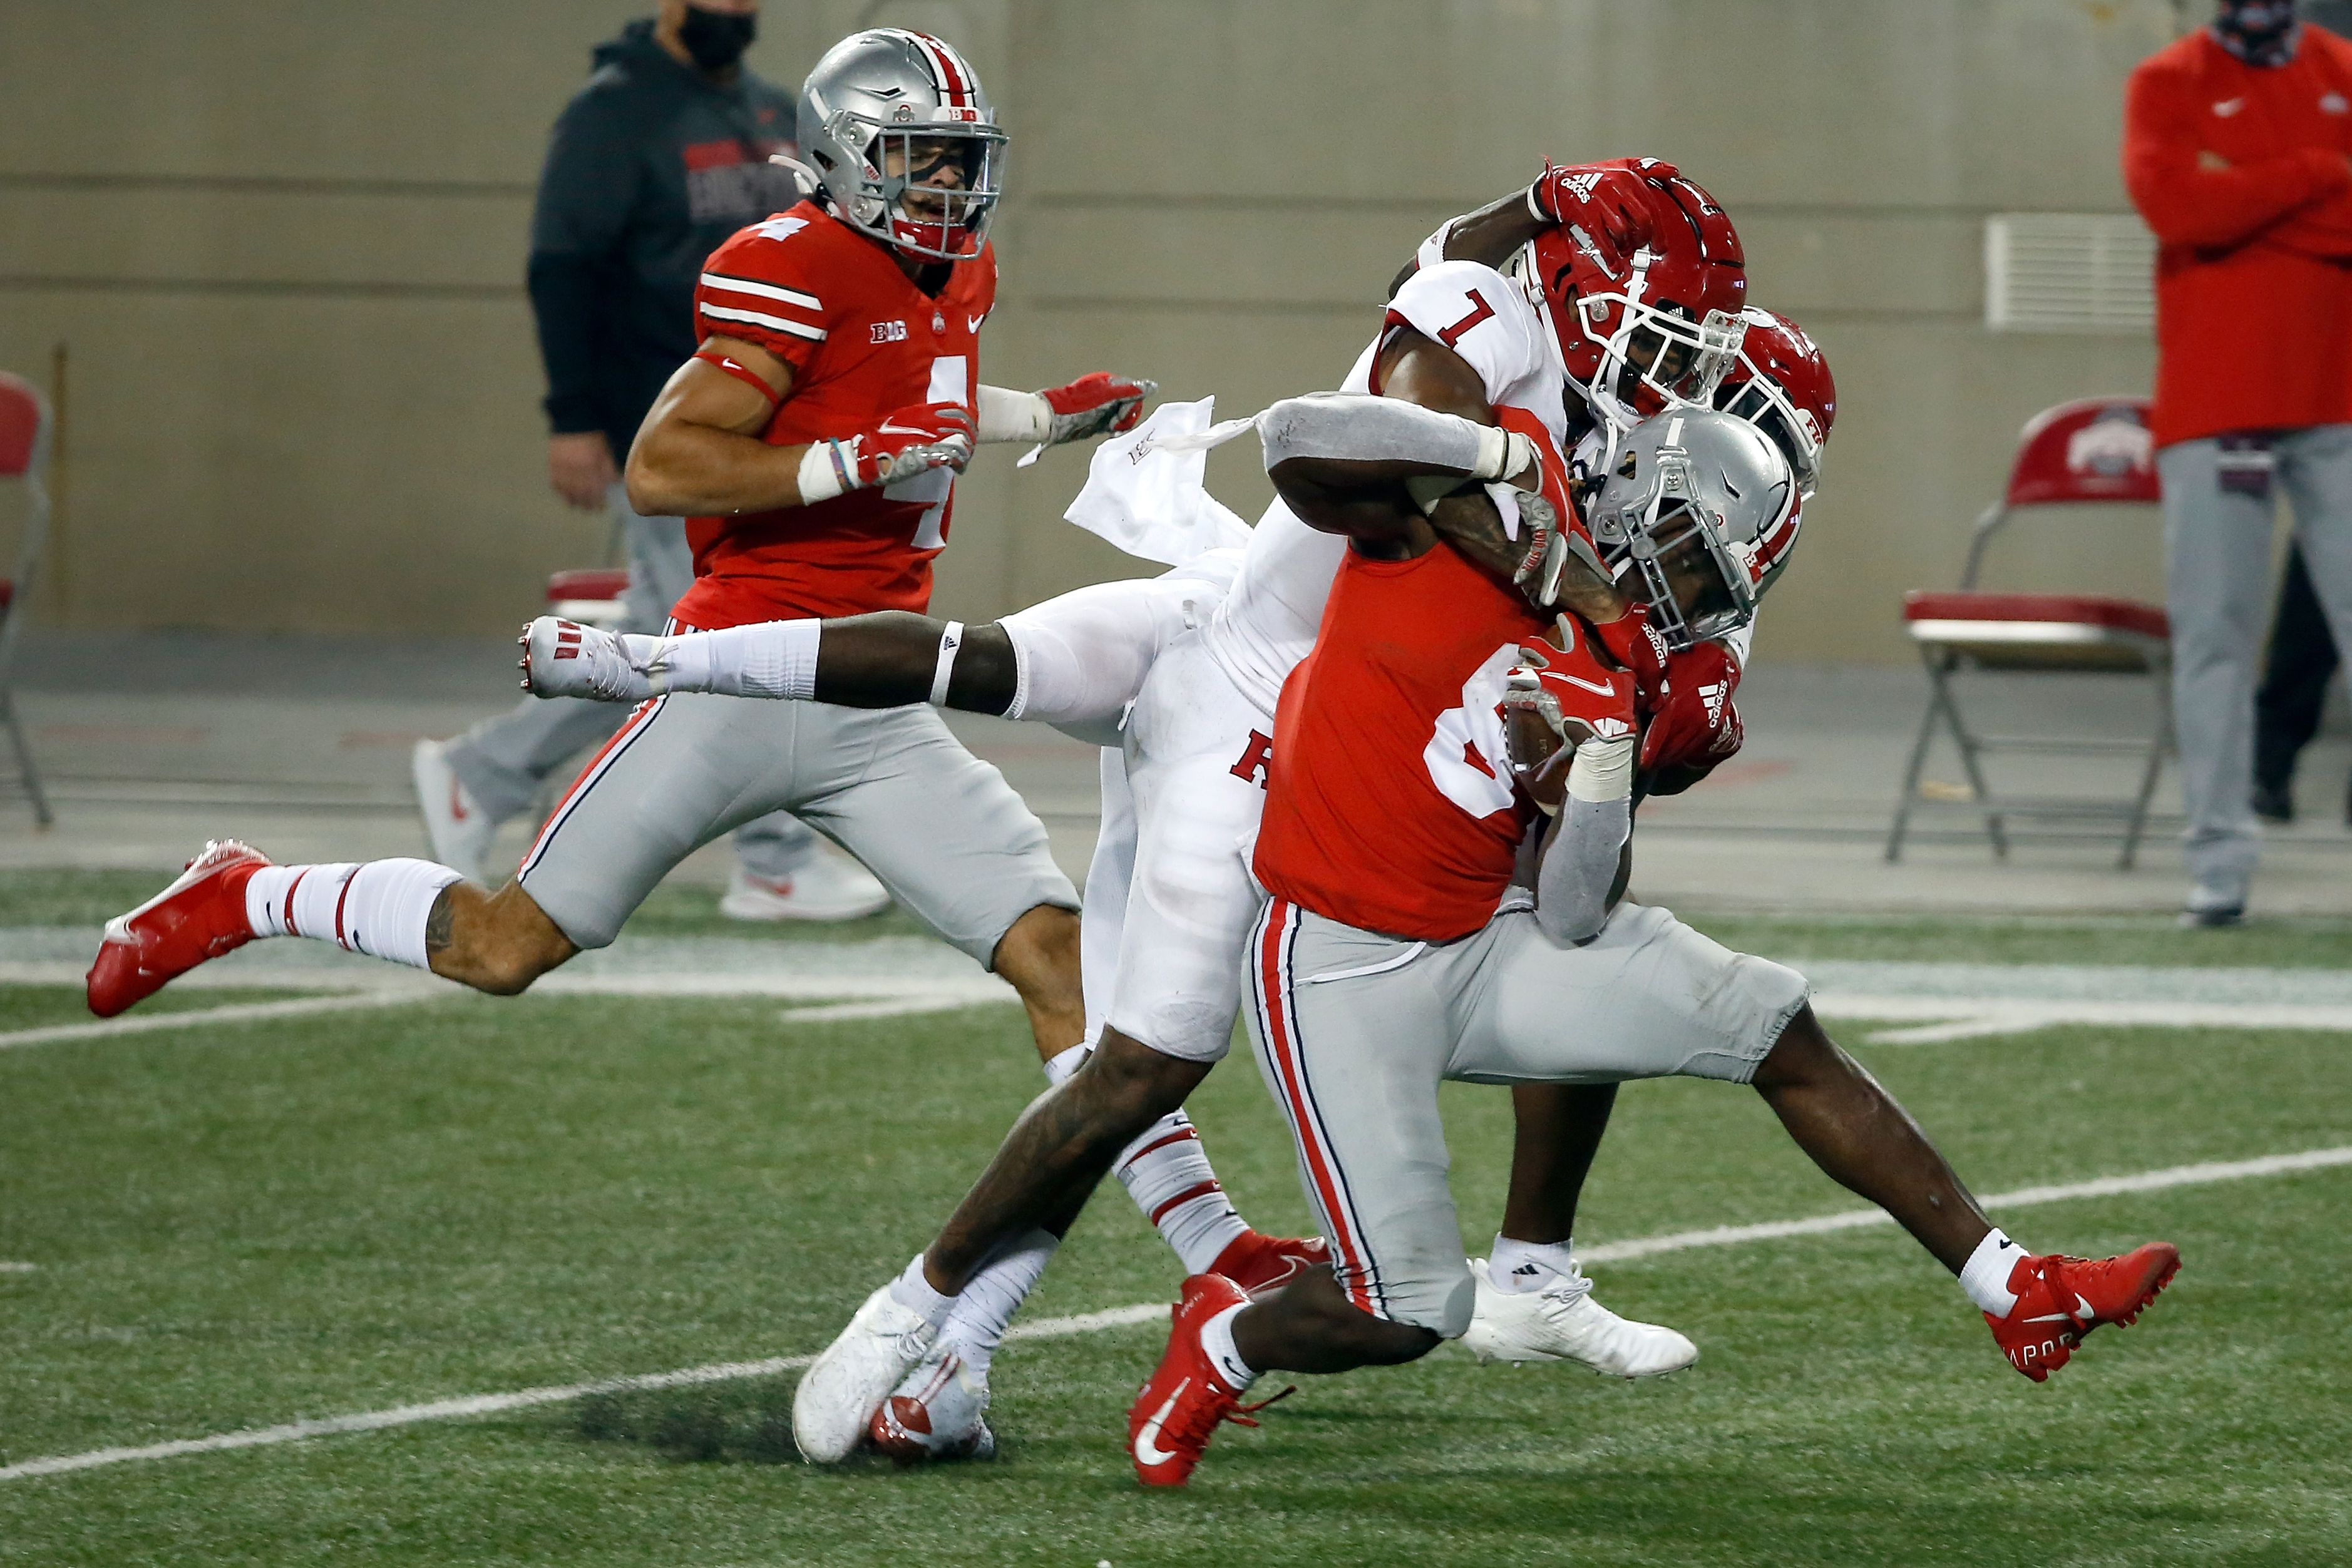 Stats That Matter, Highlights and Photos from Ohio State's Win vs. Rutgers